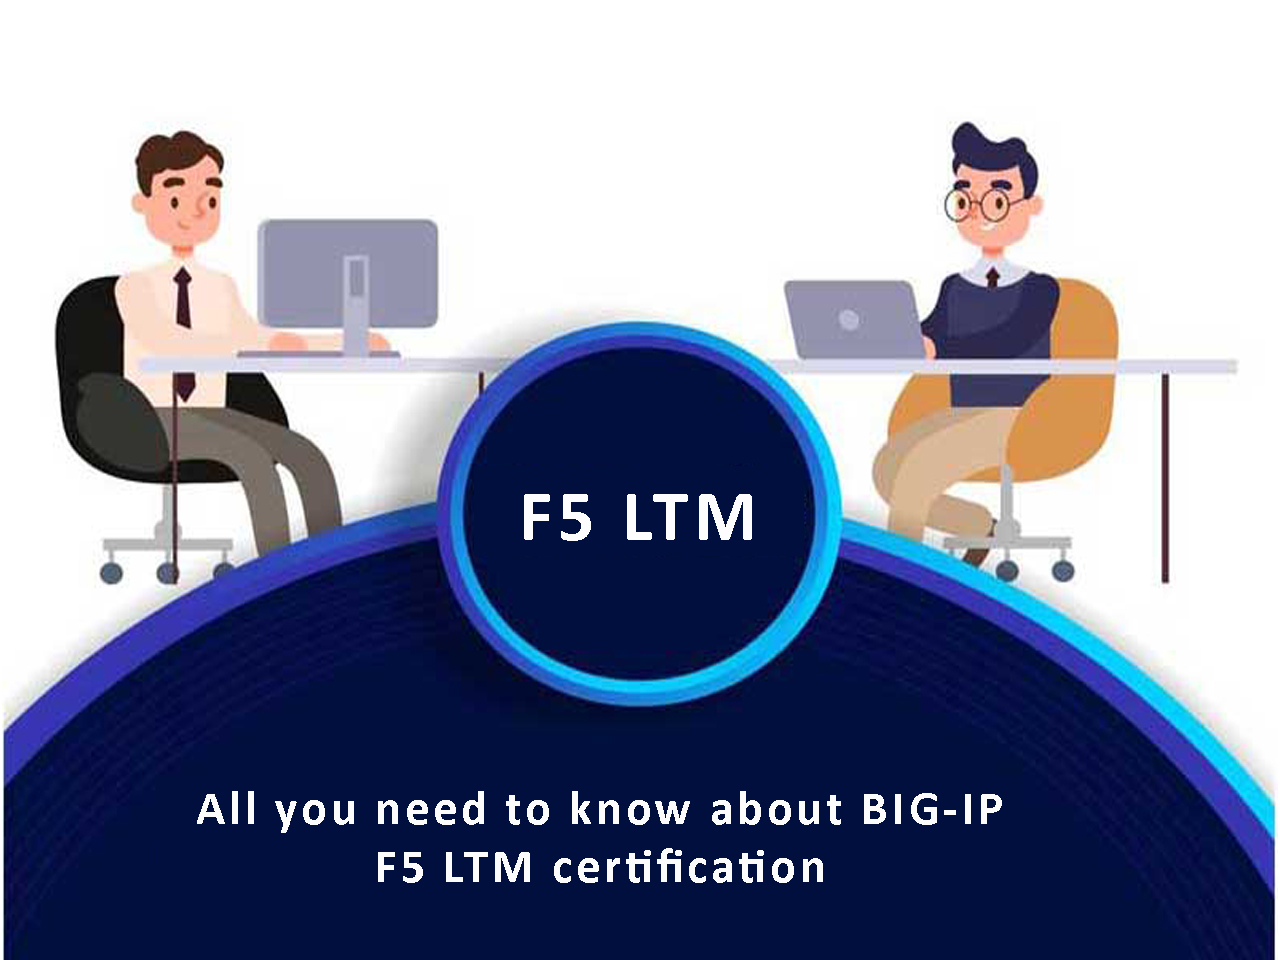 All you need to know about BIG-IP F5 LTM certification